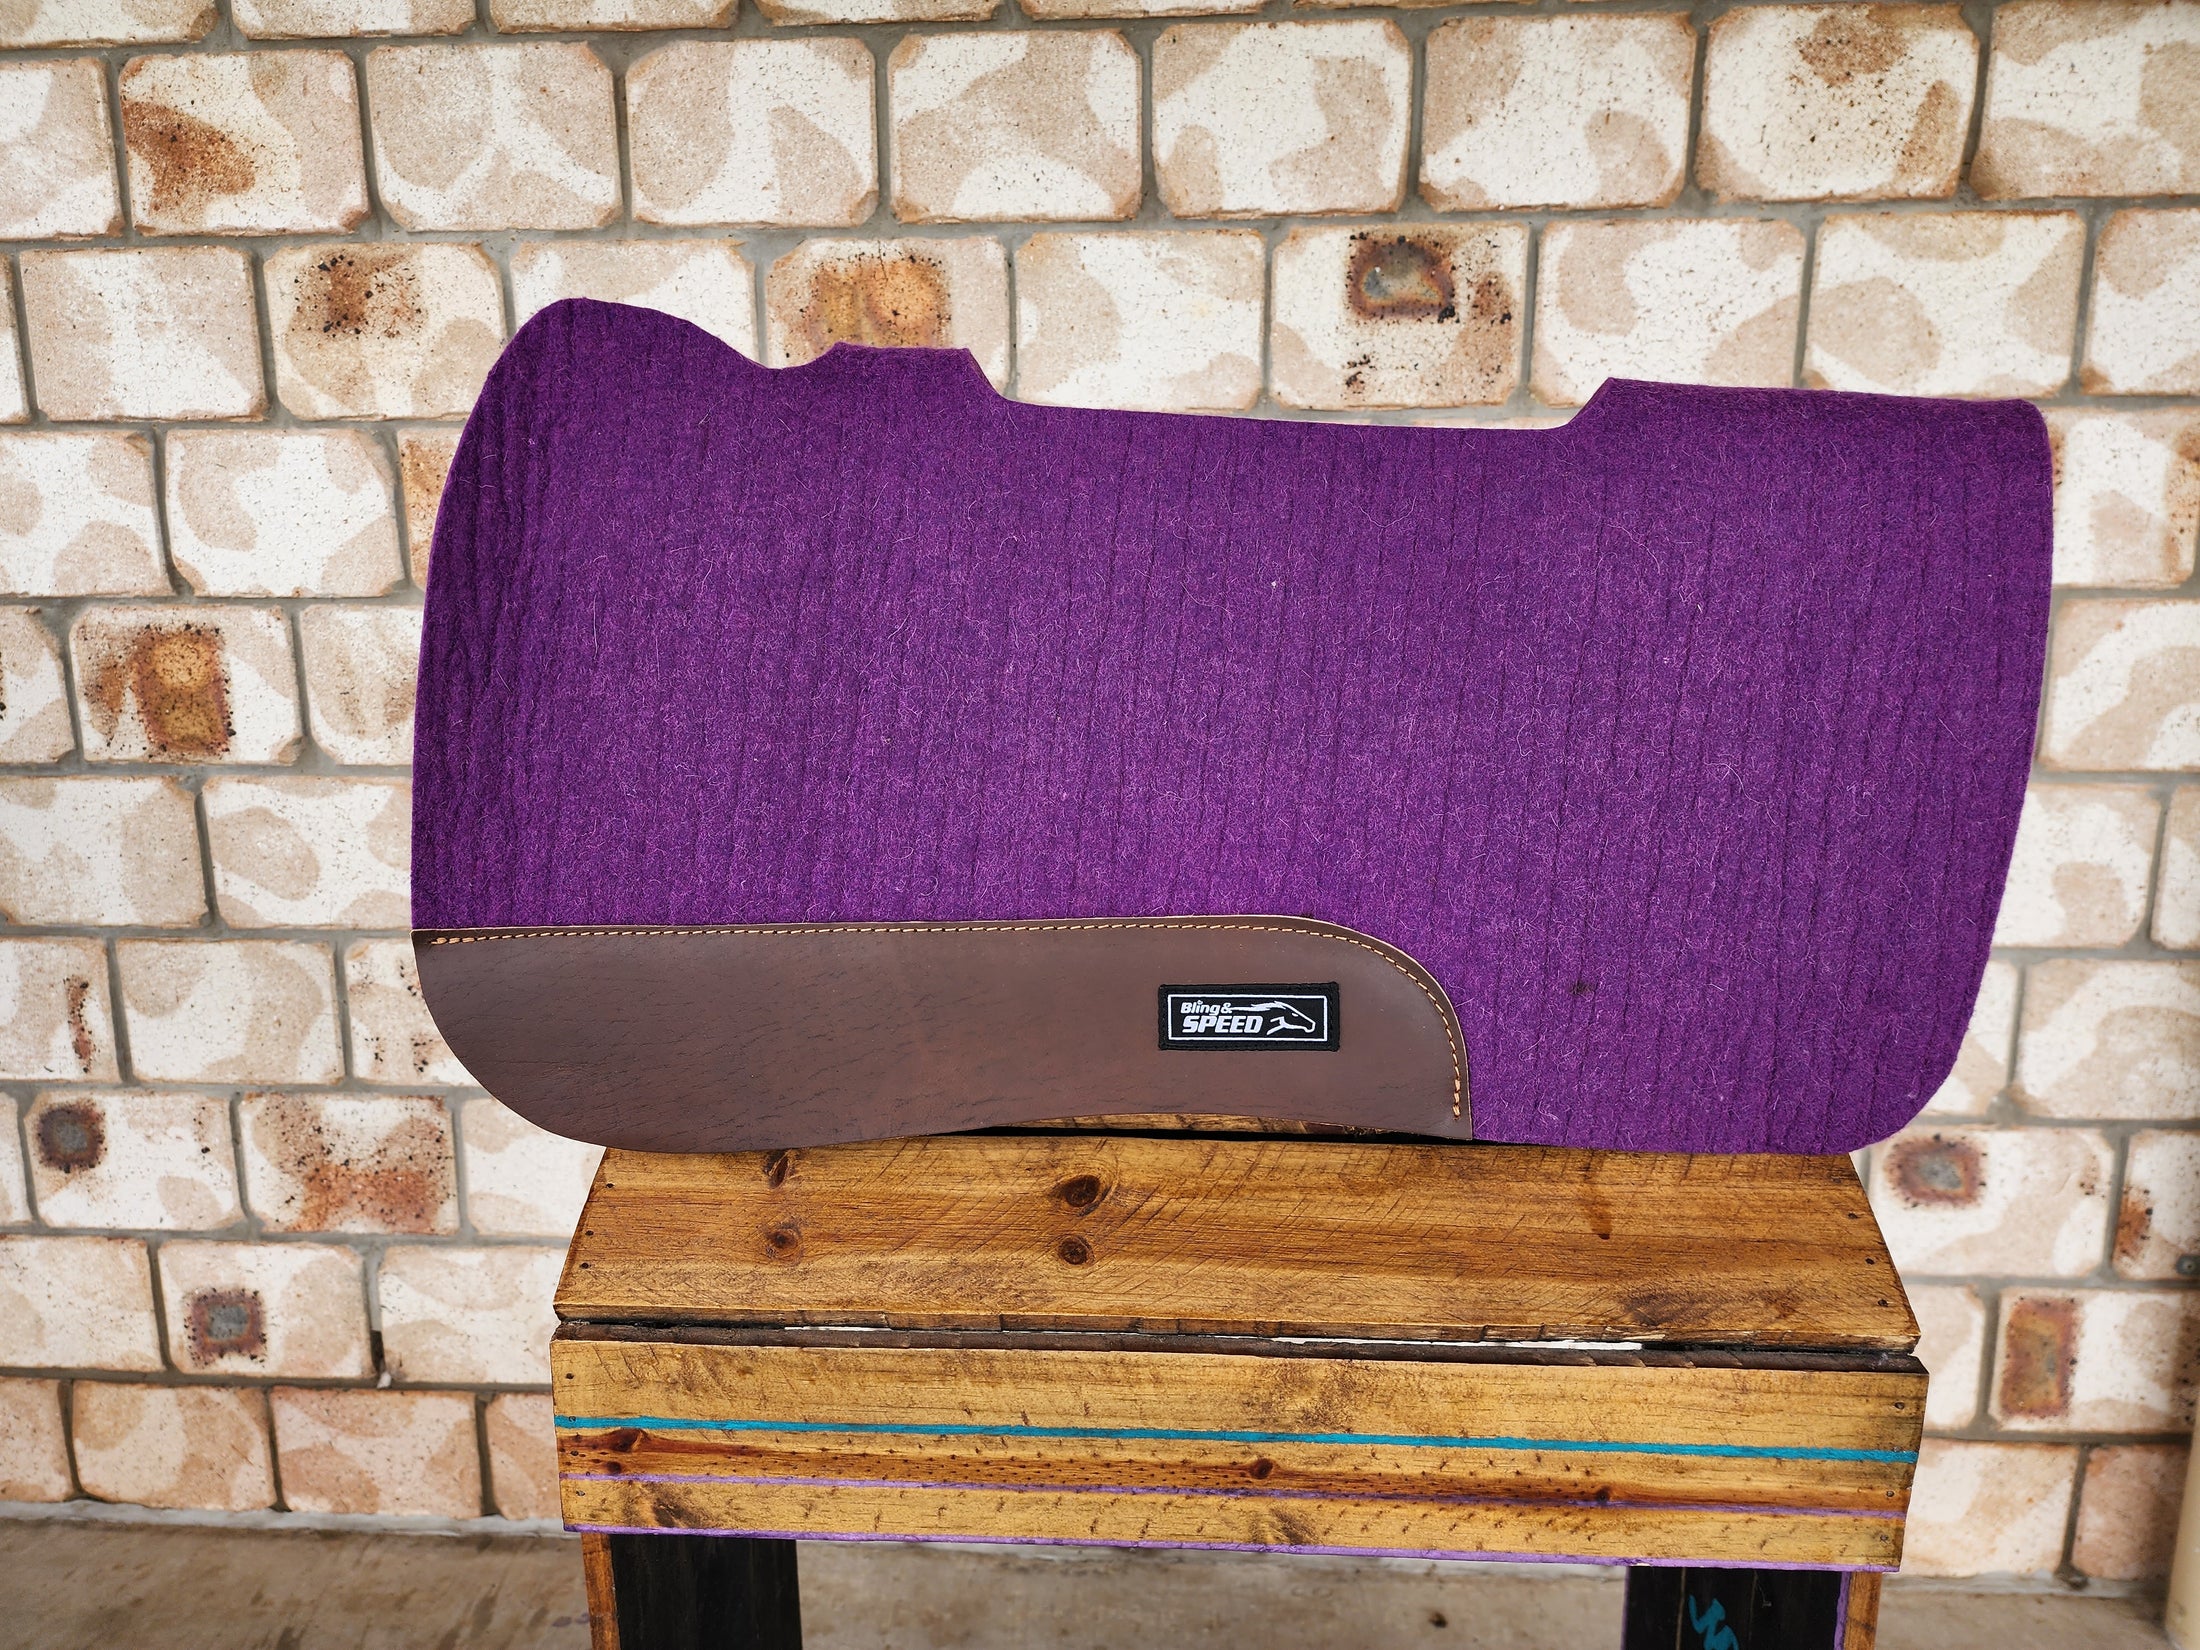 Wither and Spine Relief Felt Saddle Pad - Purple